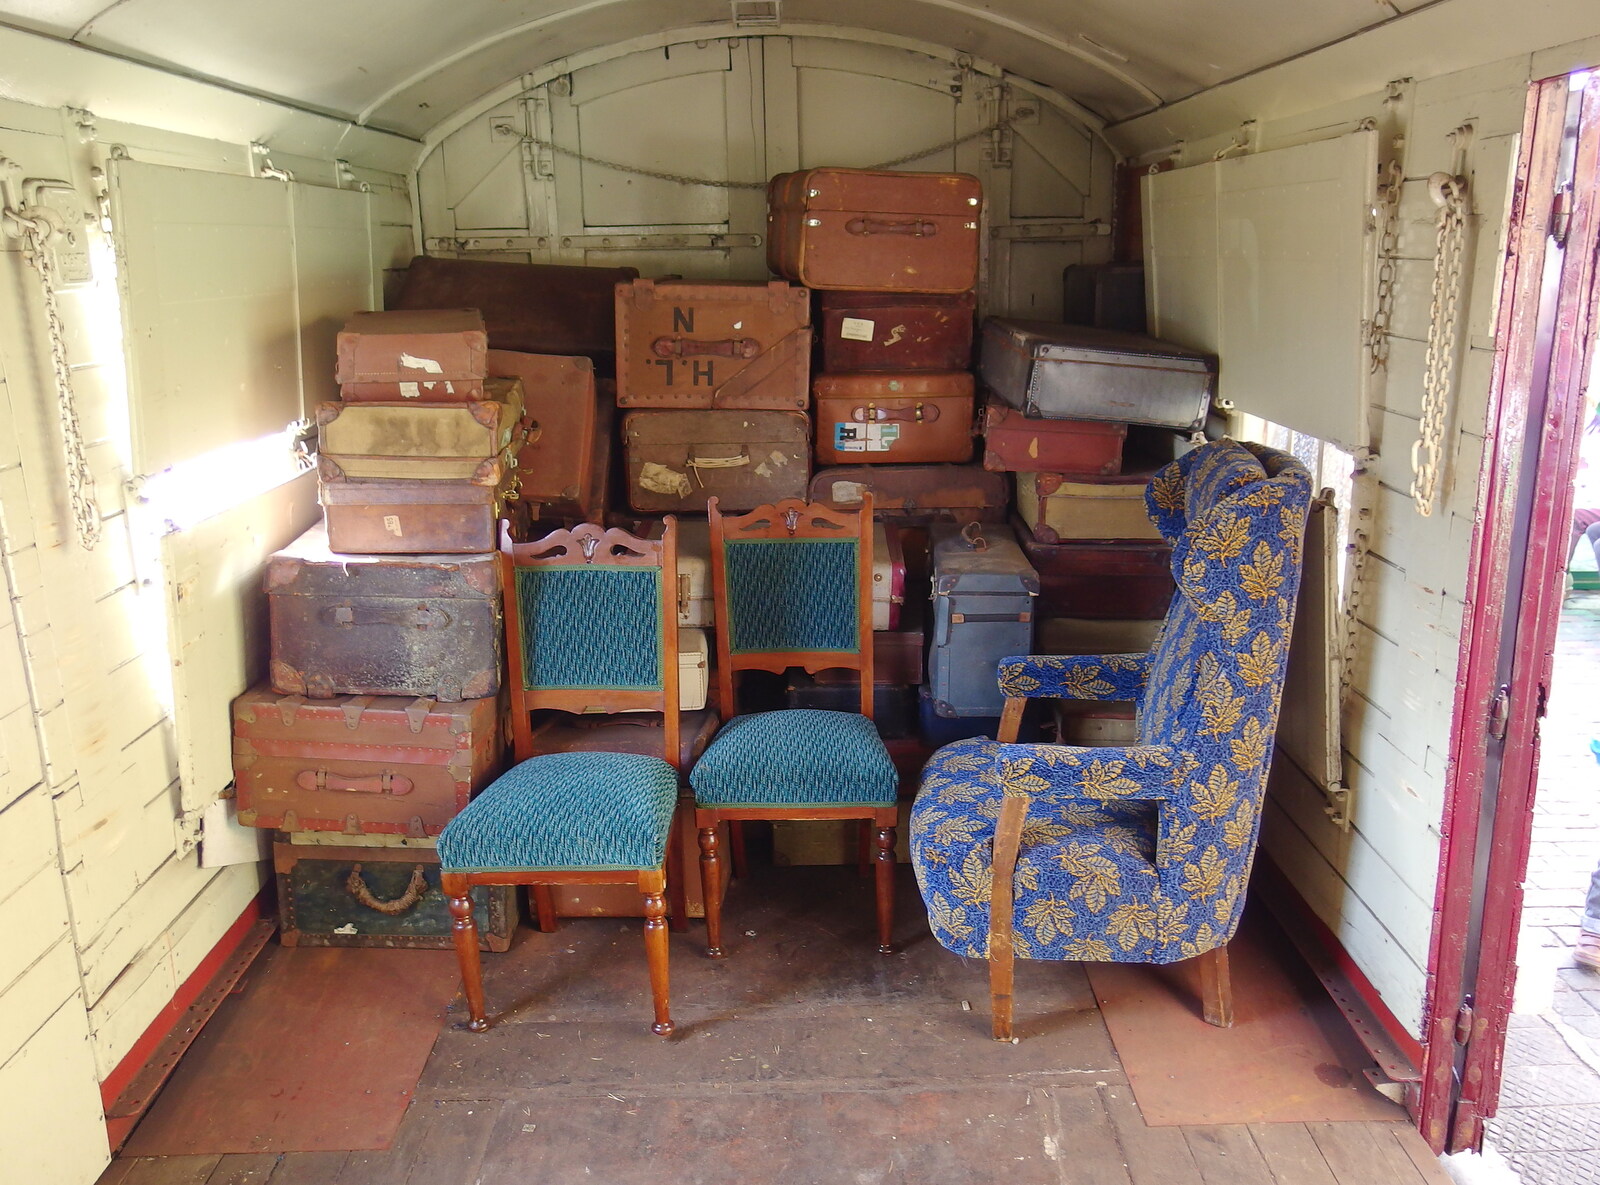 Suitcases and furniture from Paul Bear's Adventures at a 1940s Steam Weekend, Holt, Norfolk - 22nd September 2013